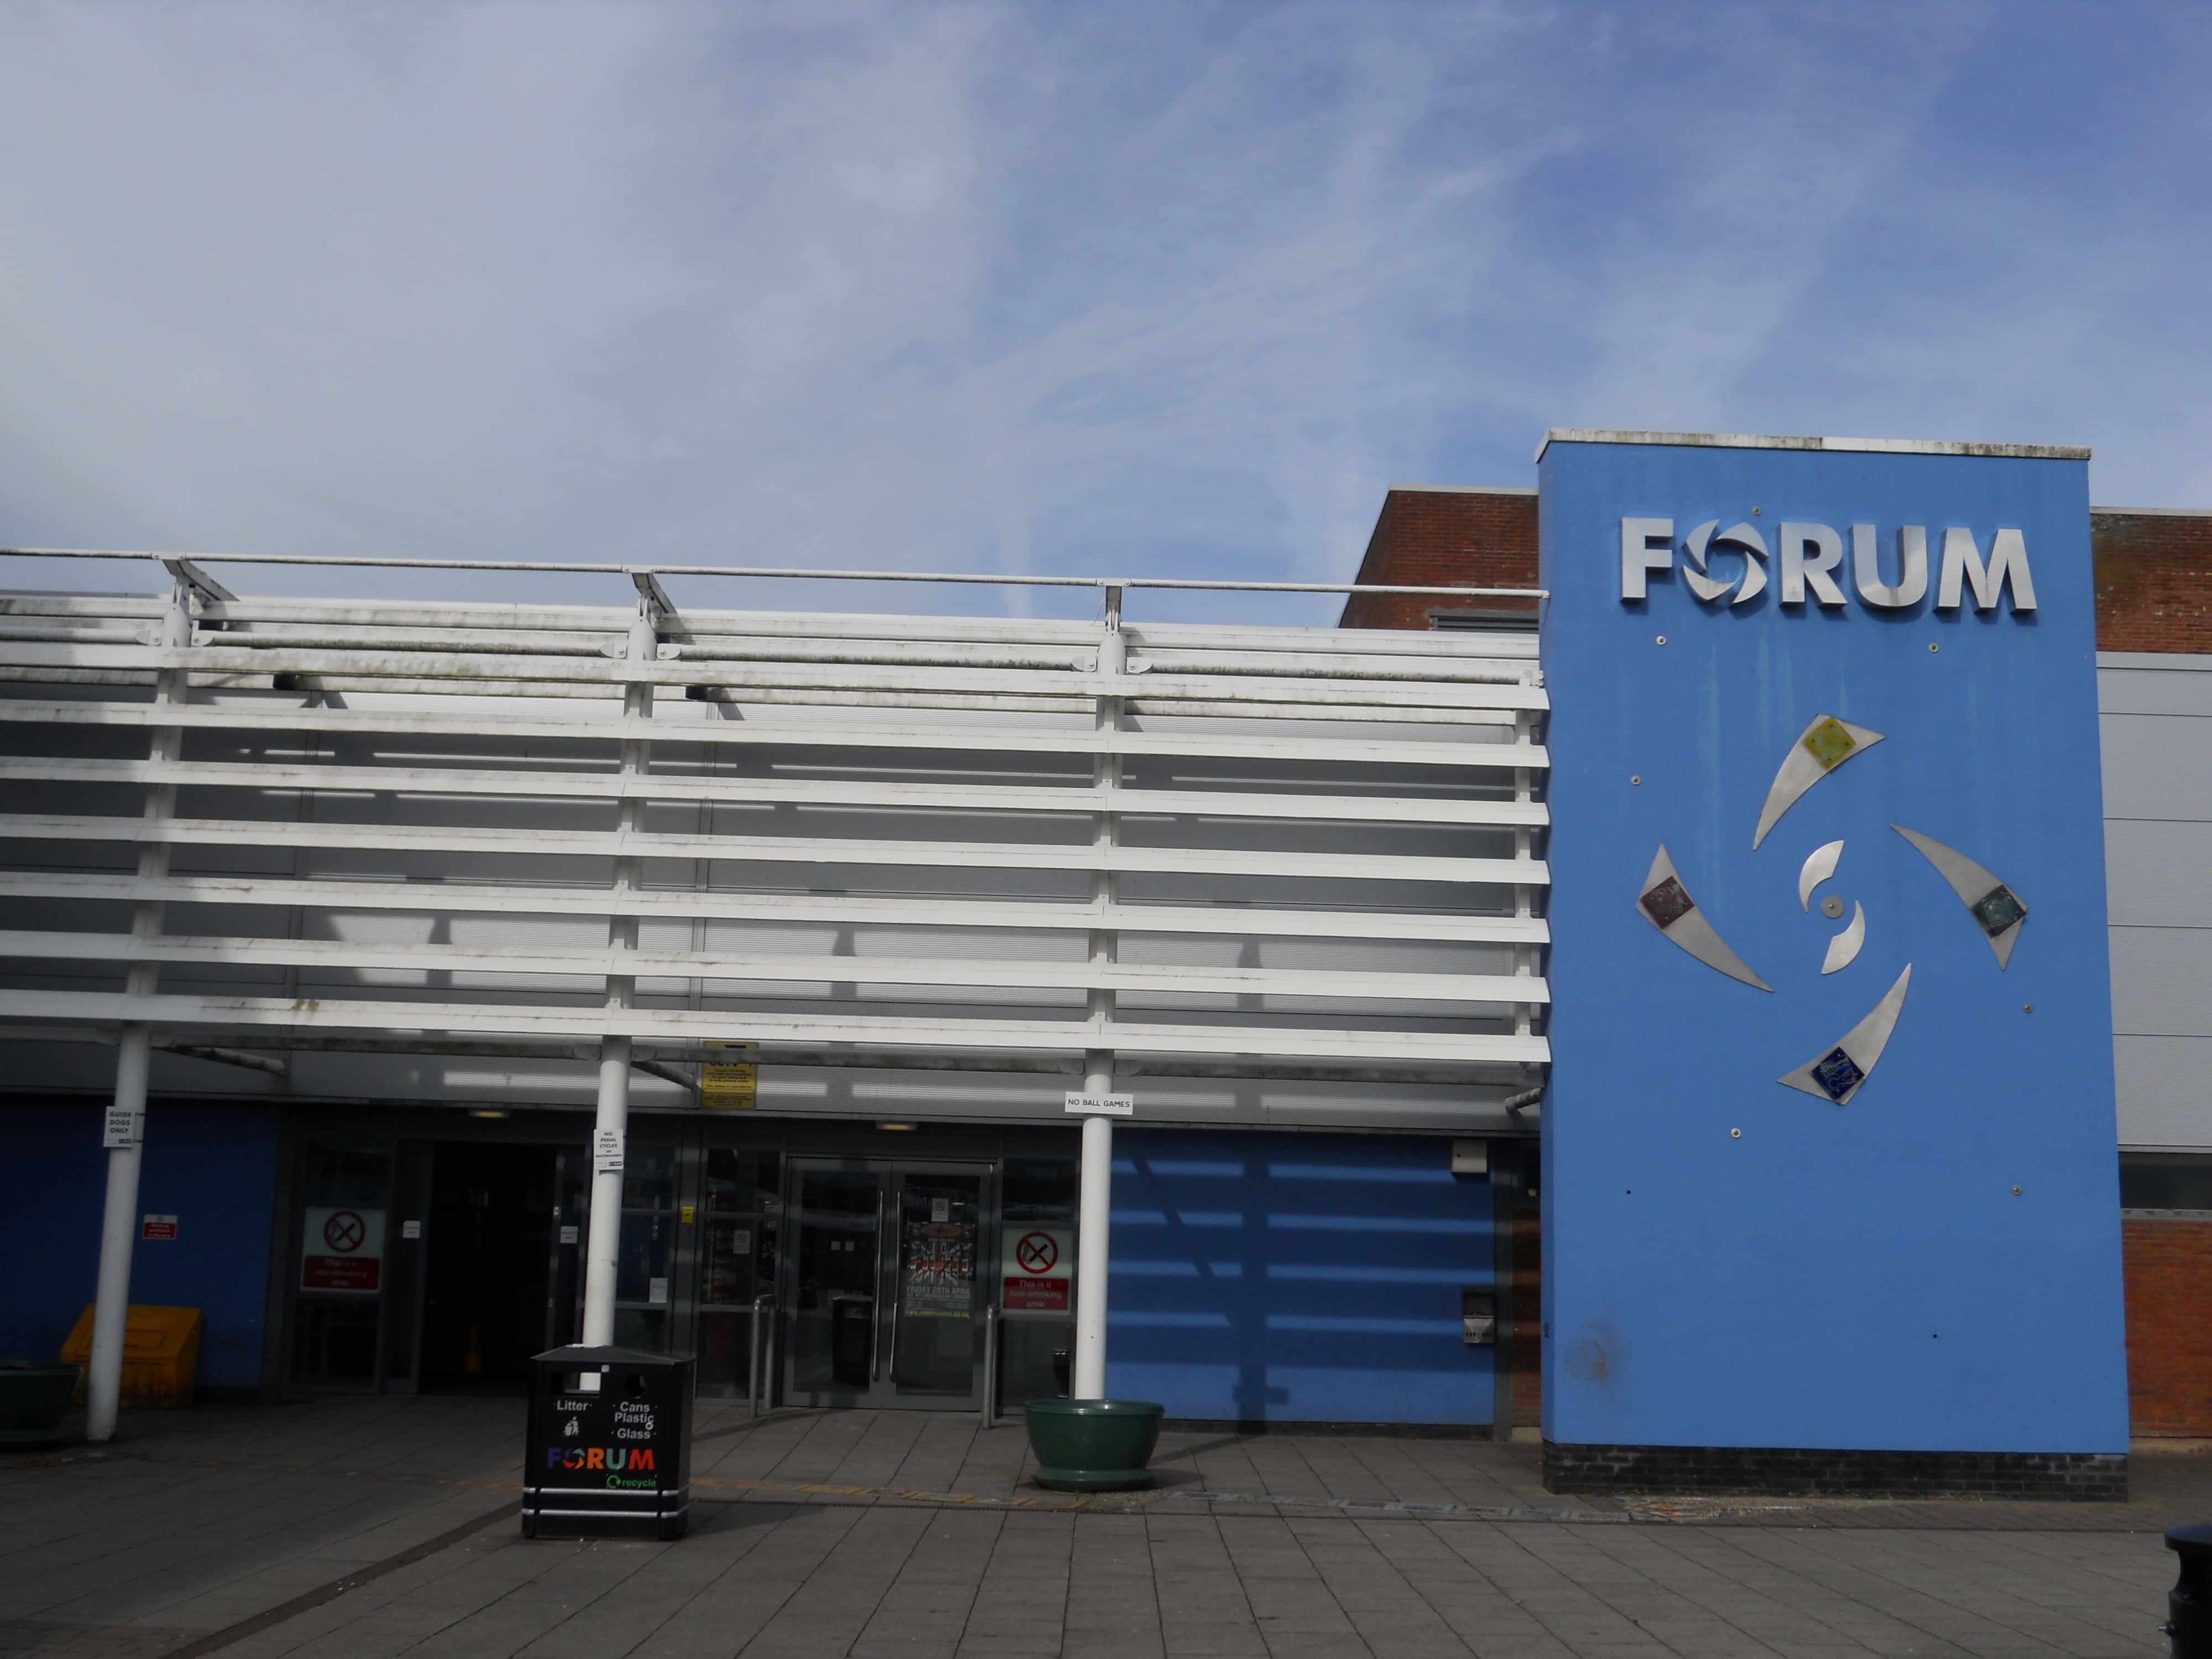 The Forum Centre for hire